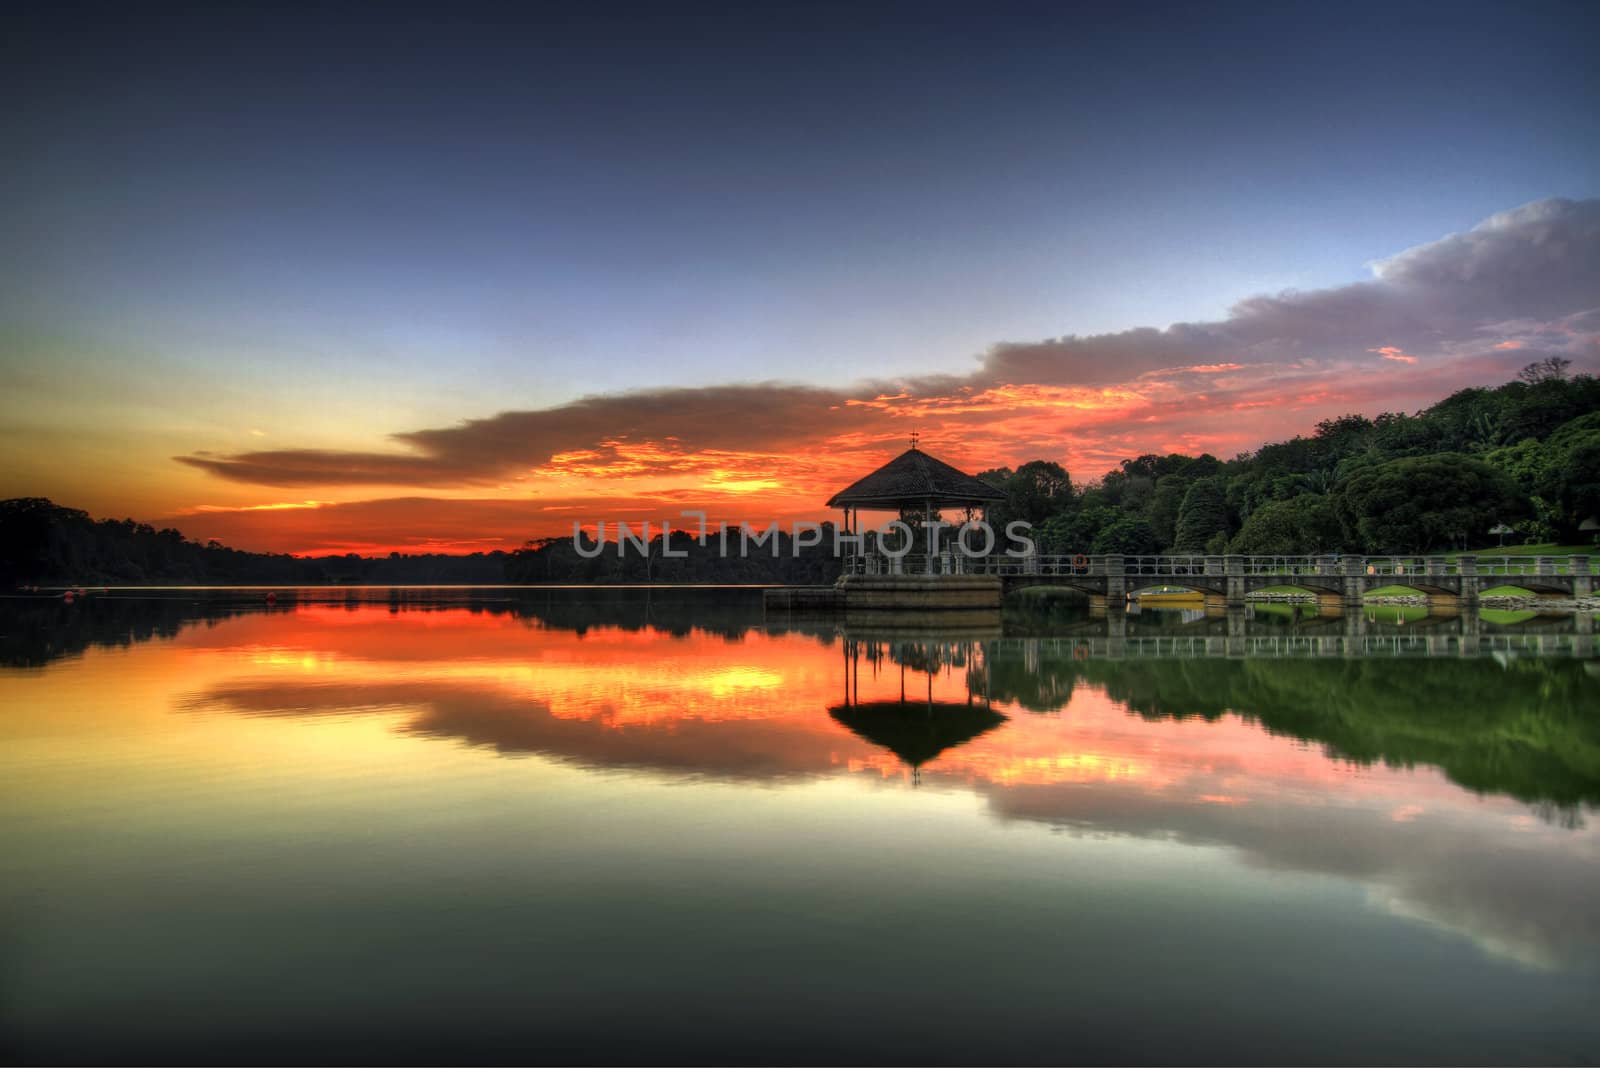 Sunset at the Lower Peirce Reservoir Lake in Singapore 2